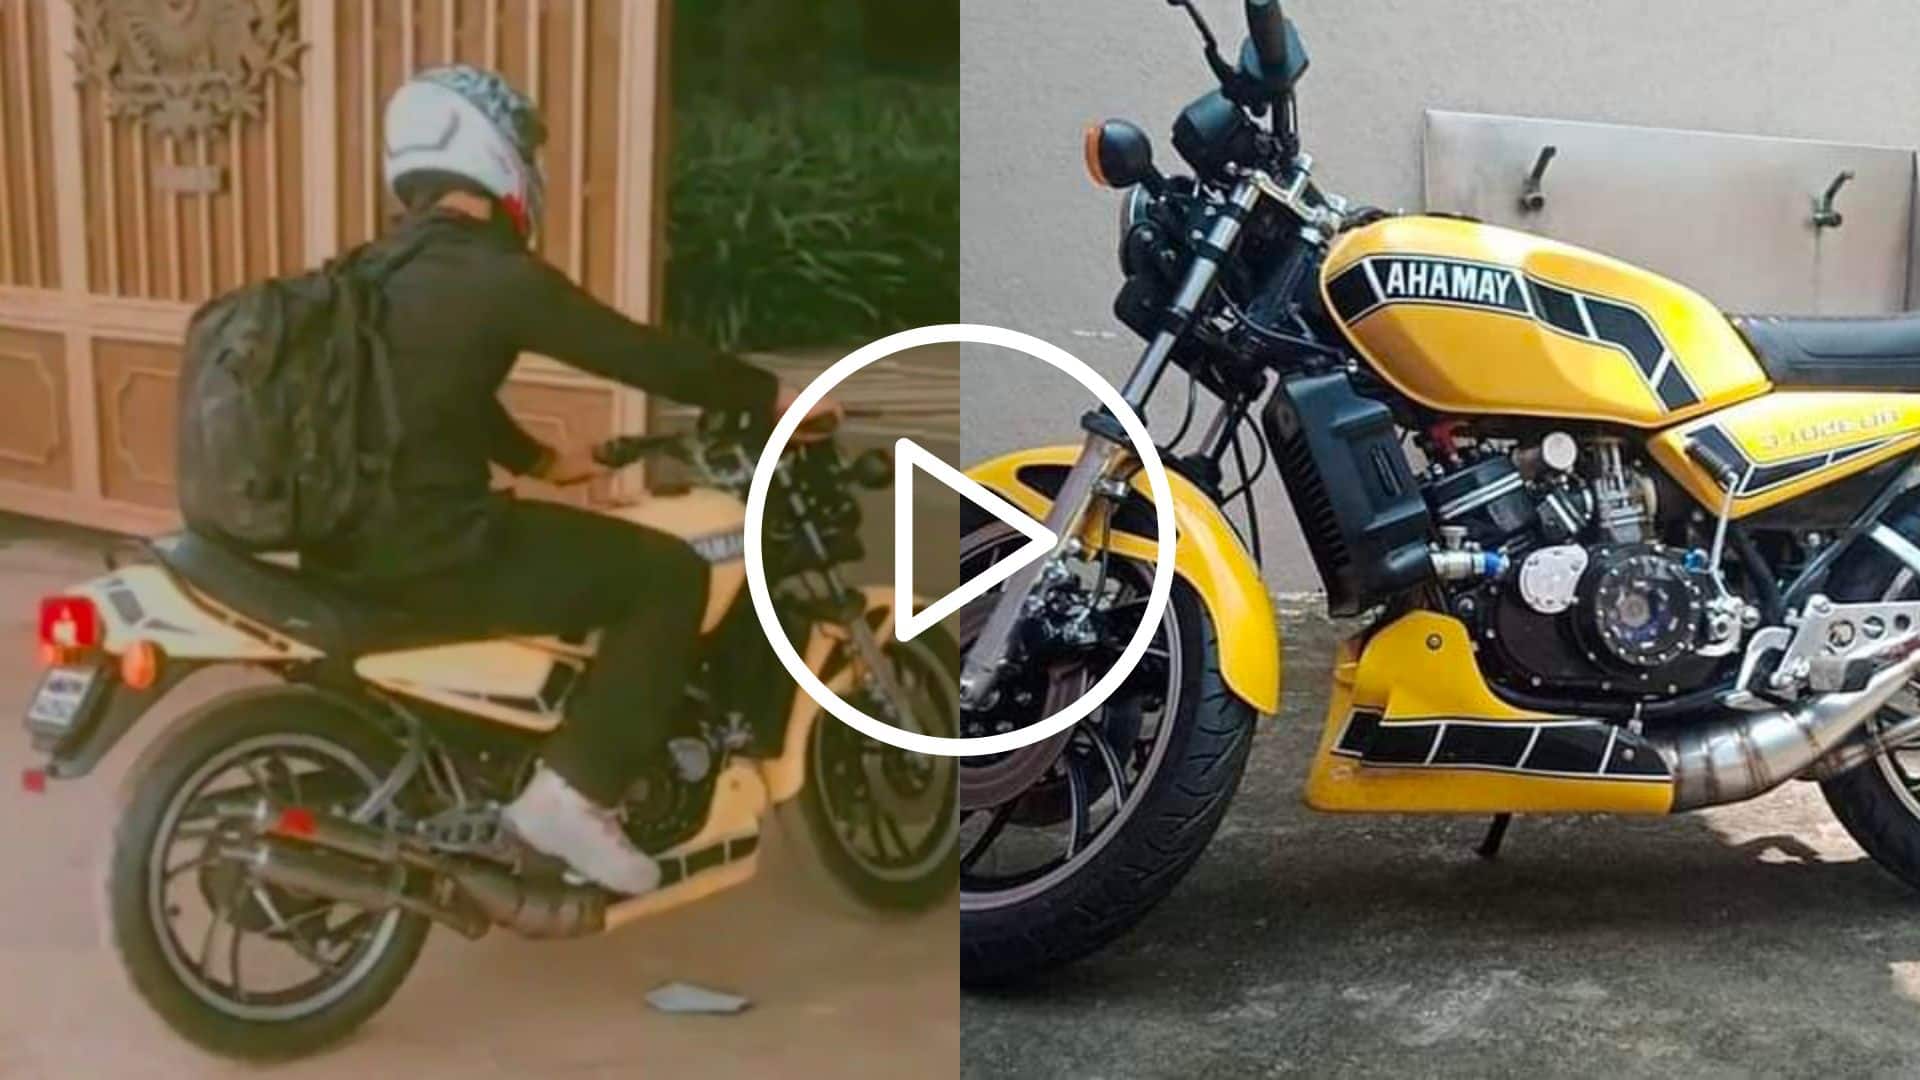 [Watch] MS Dhoni Rides His Yamada RD350 In Ranchi; Video Goes Viral